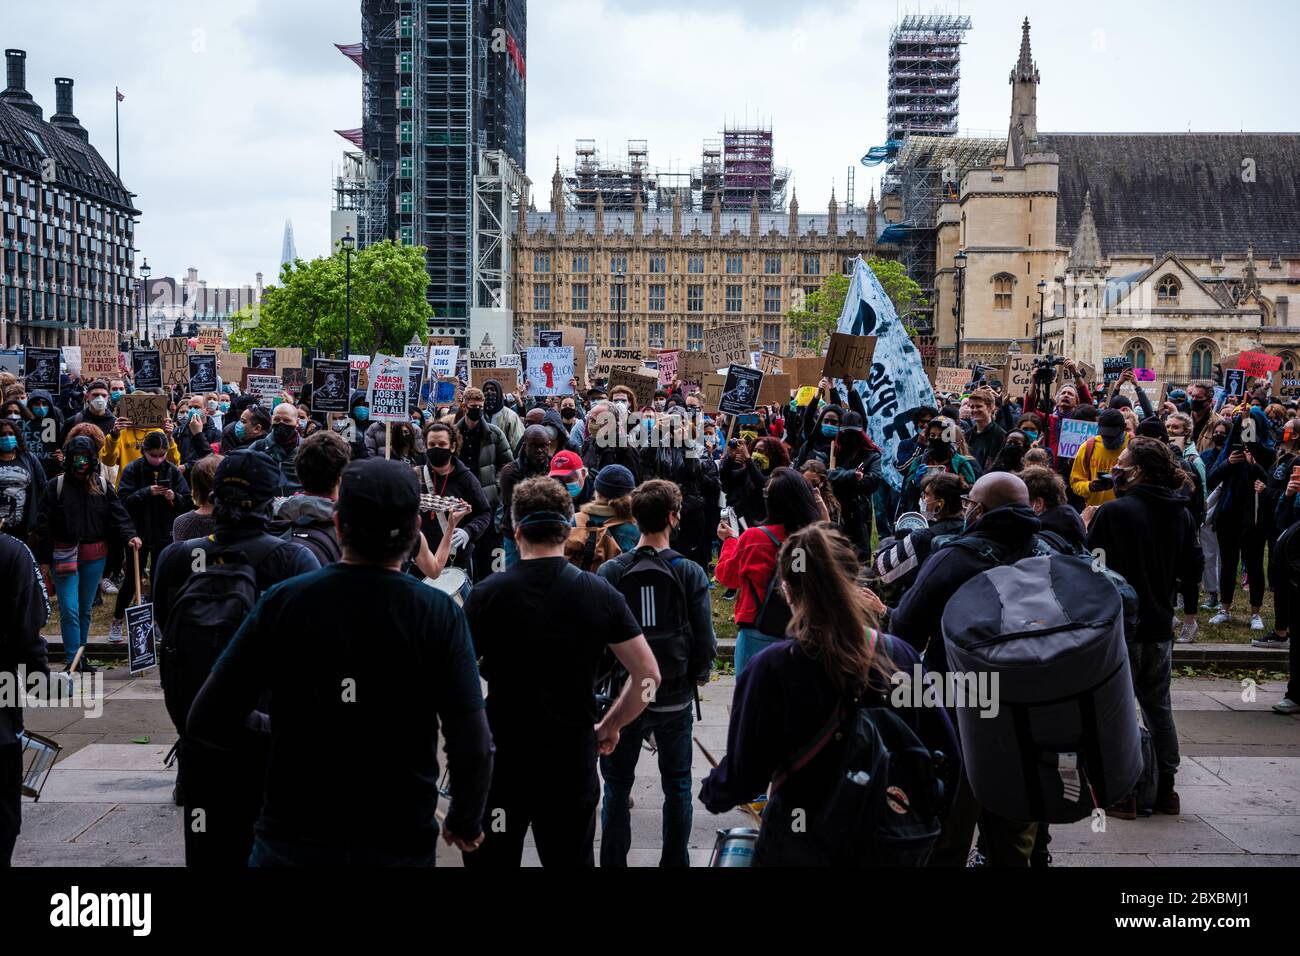 London, UK. 6th June, 2020. Black Lives Matter Protest in Parliament Square in London.  In memory of George Floyd who was killed on the 25th May while in police custody in the US city of Minneapolis. Credit: Yousef Al Nasser/Alamy Live News. Stock Photo